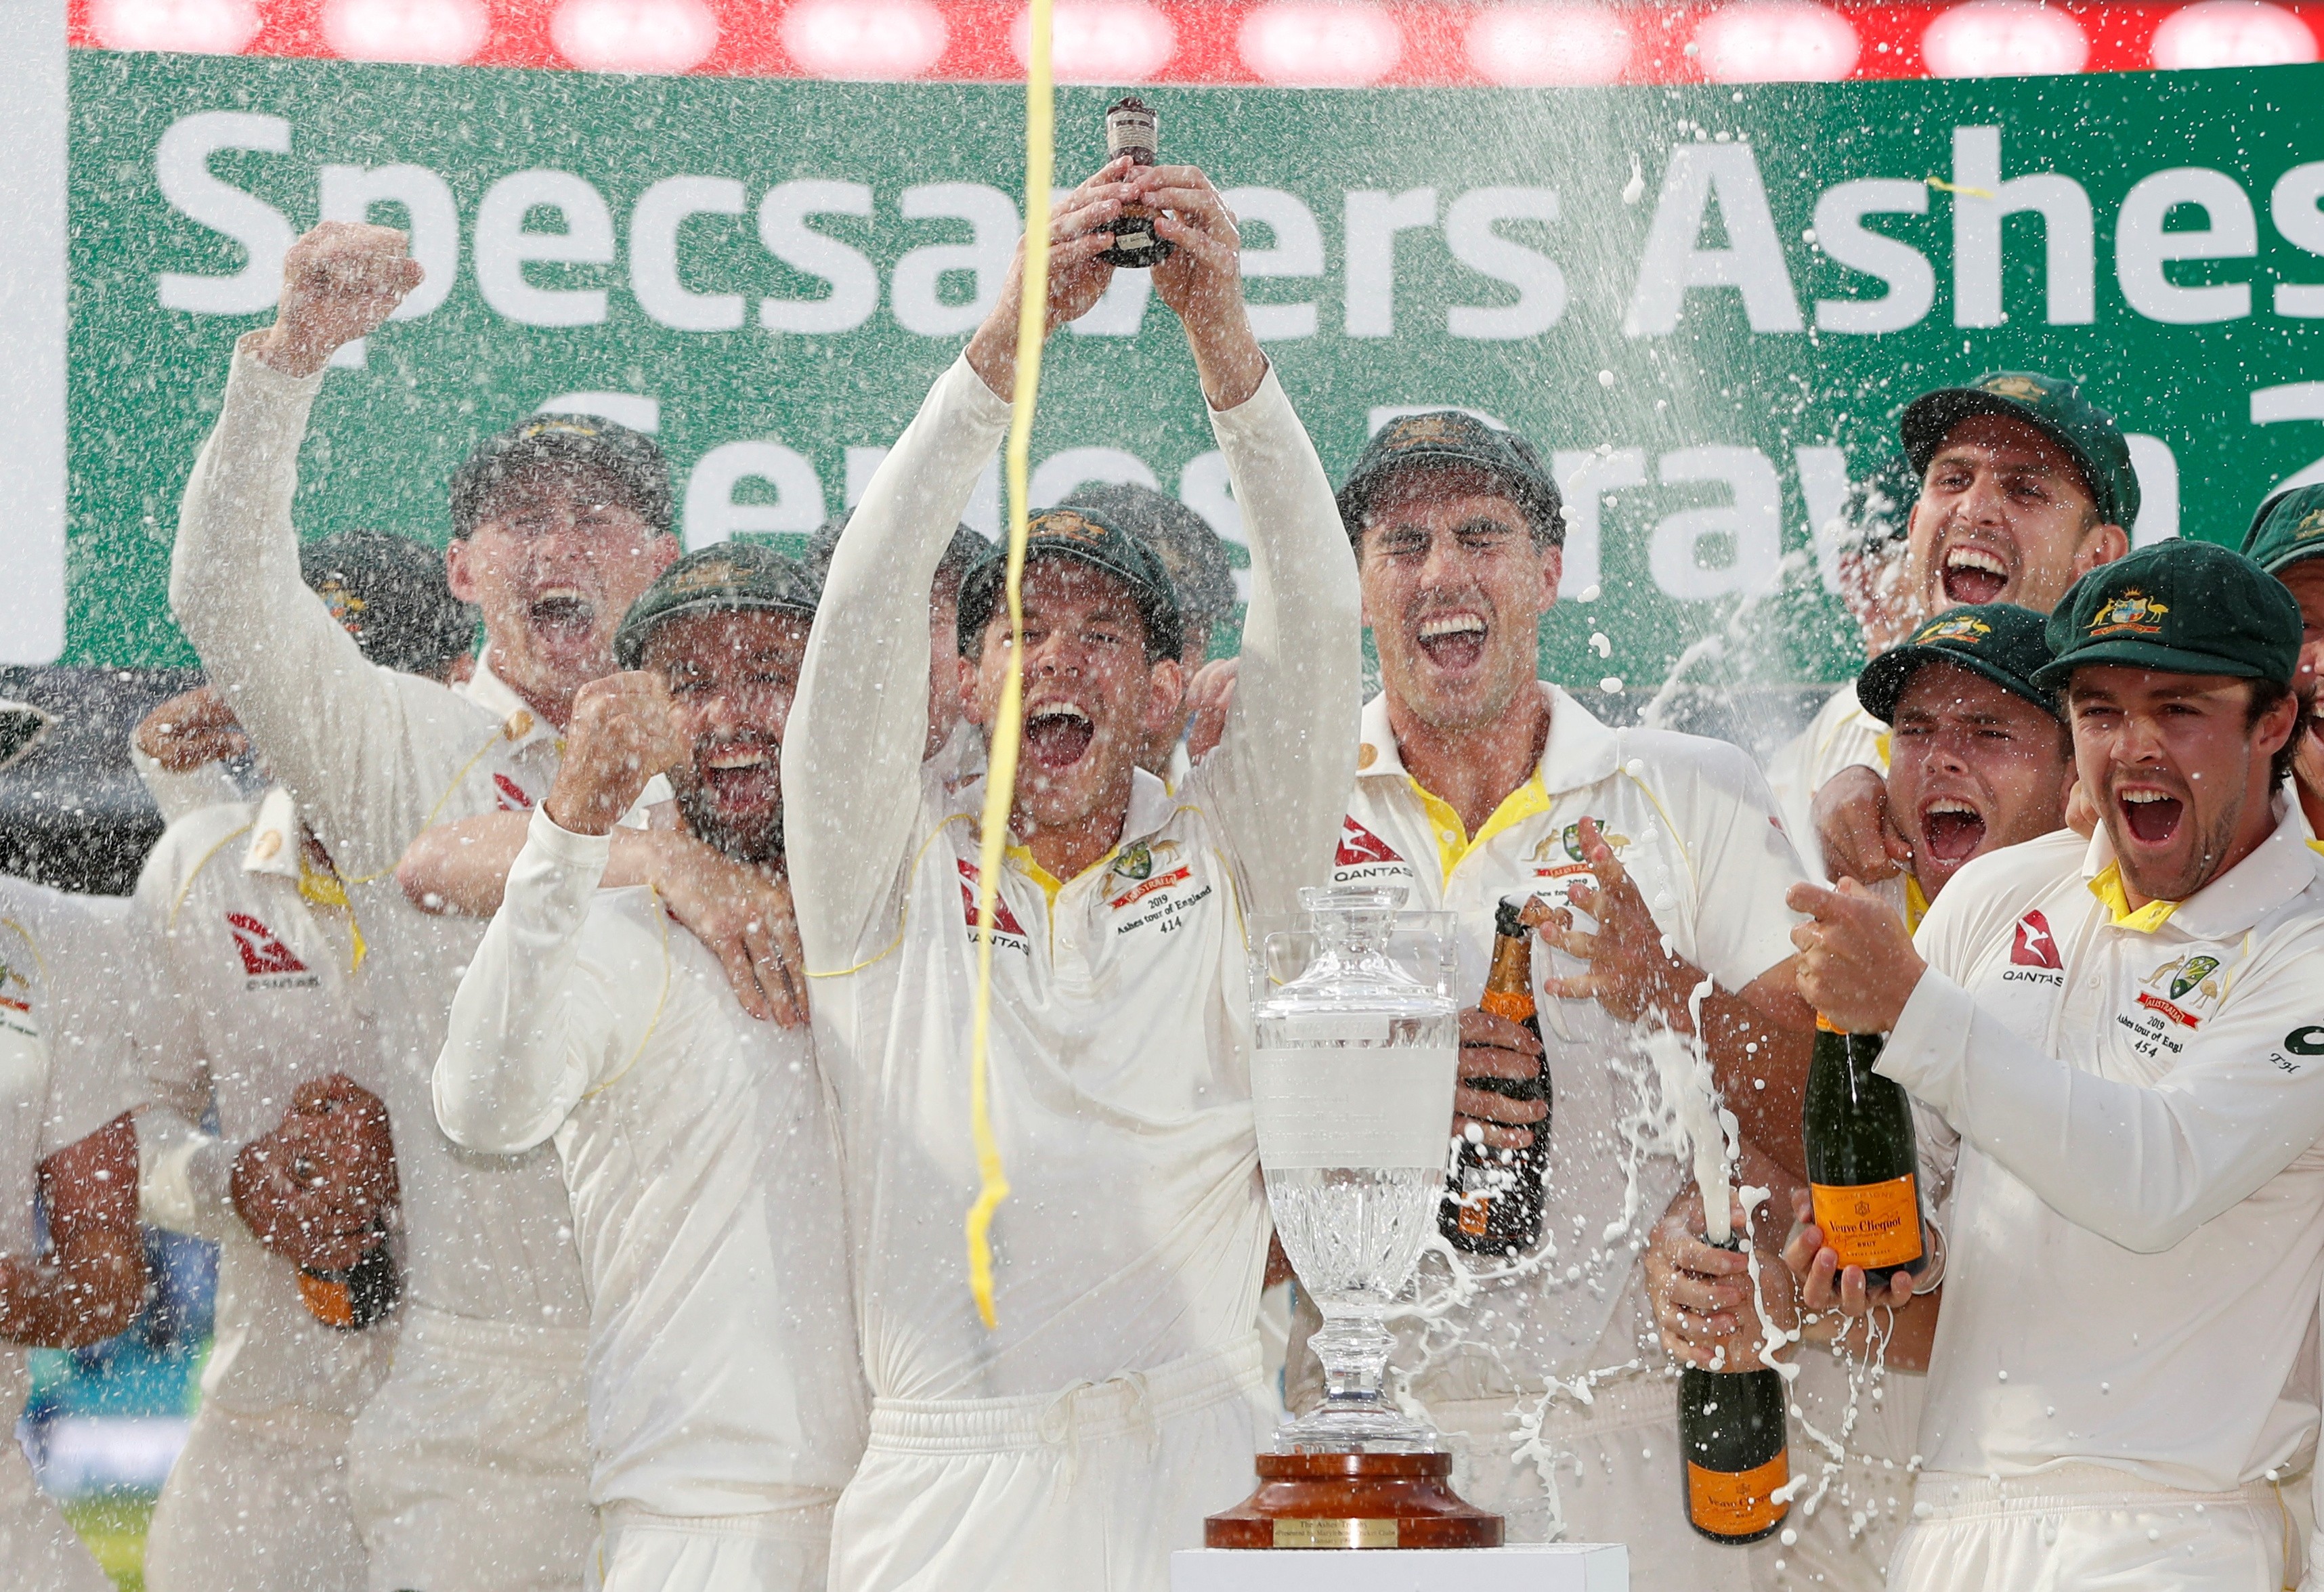 Australia’s Tim Paine holds up the Ashes urn as Australia celebrate retaining the Ashes. Photo: Reuters